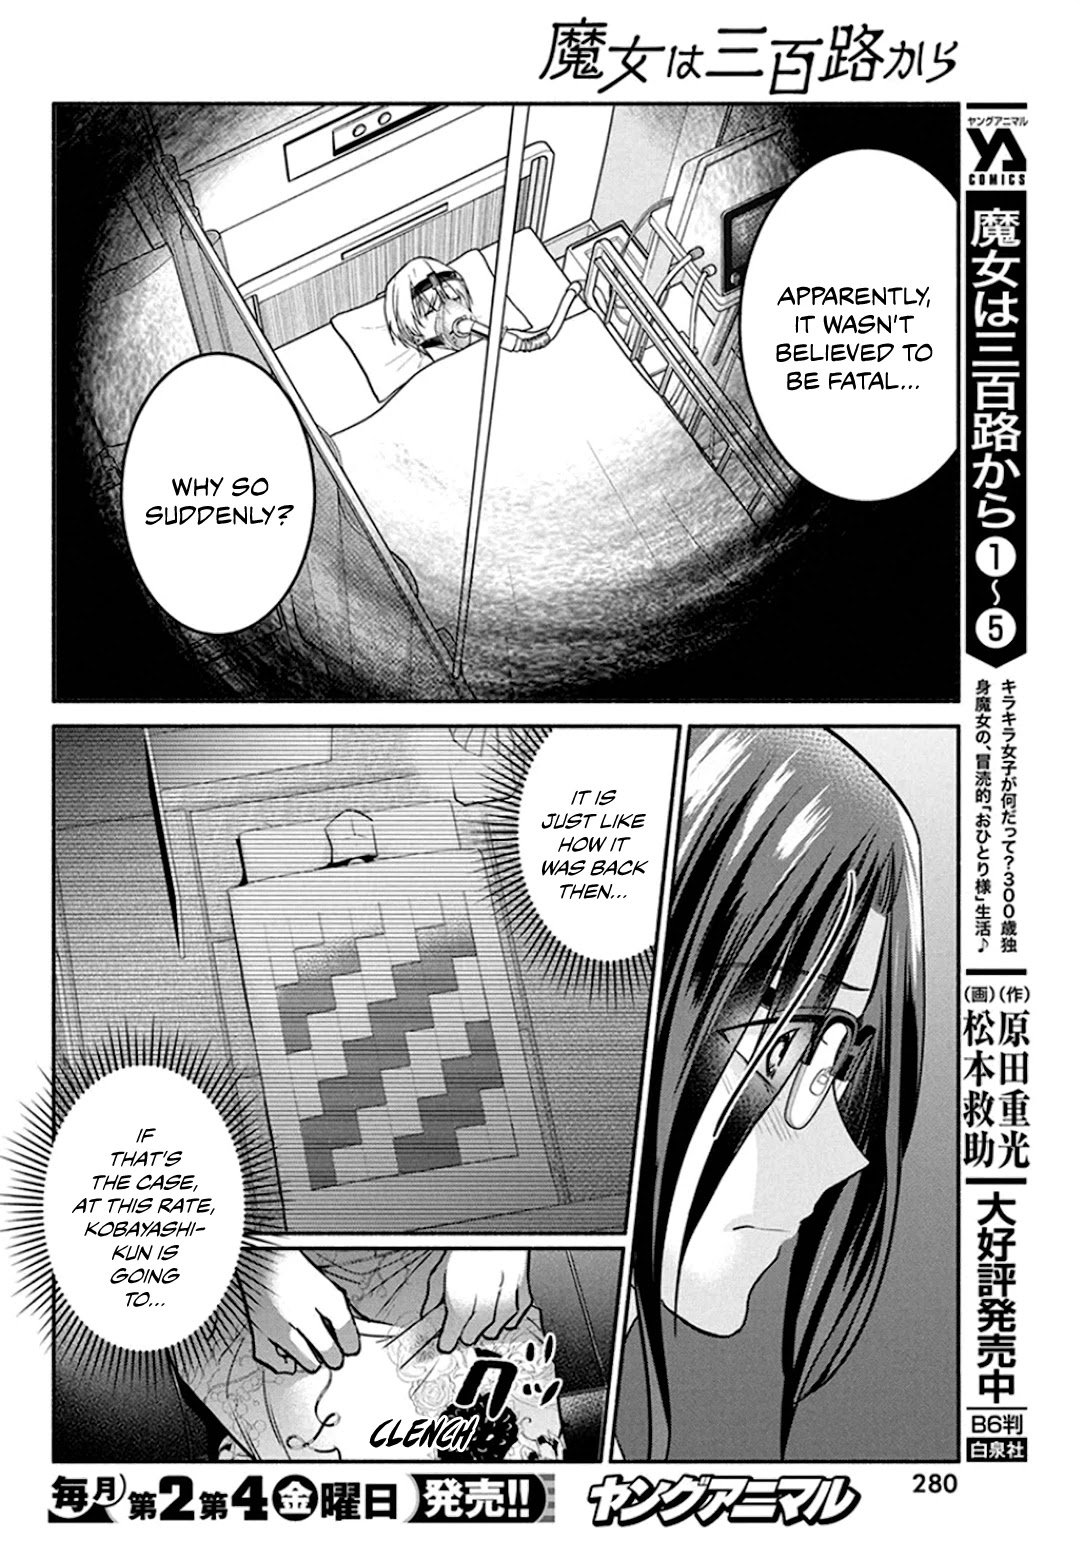 The Life of the Witch Who Remains Single for About 300 Years! - Chapter 48 Page 5